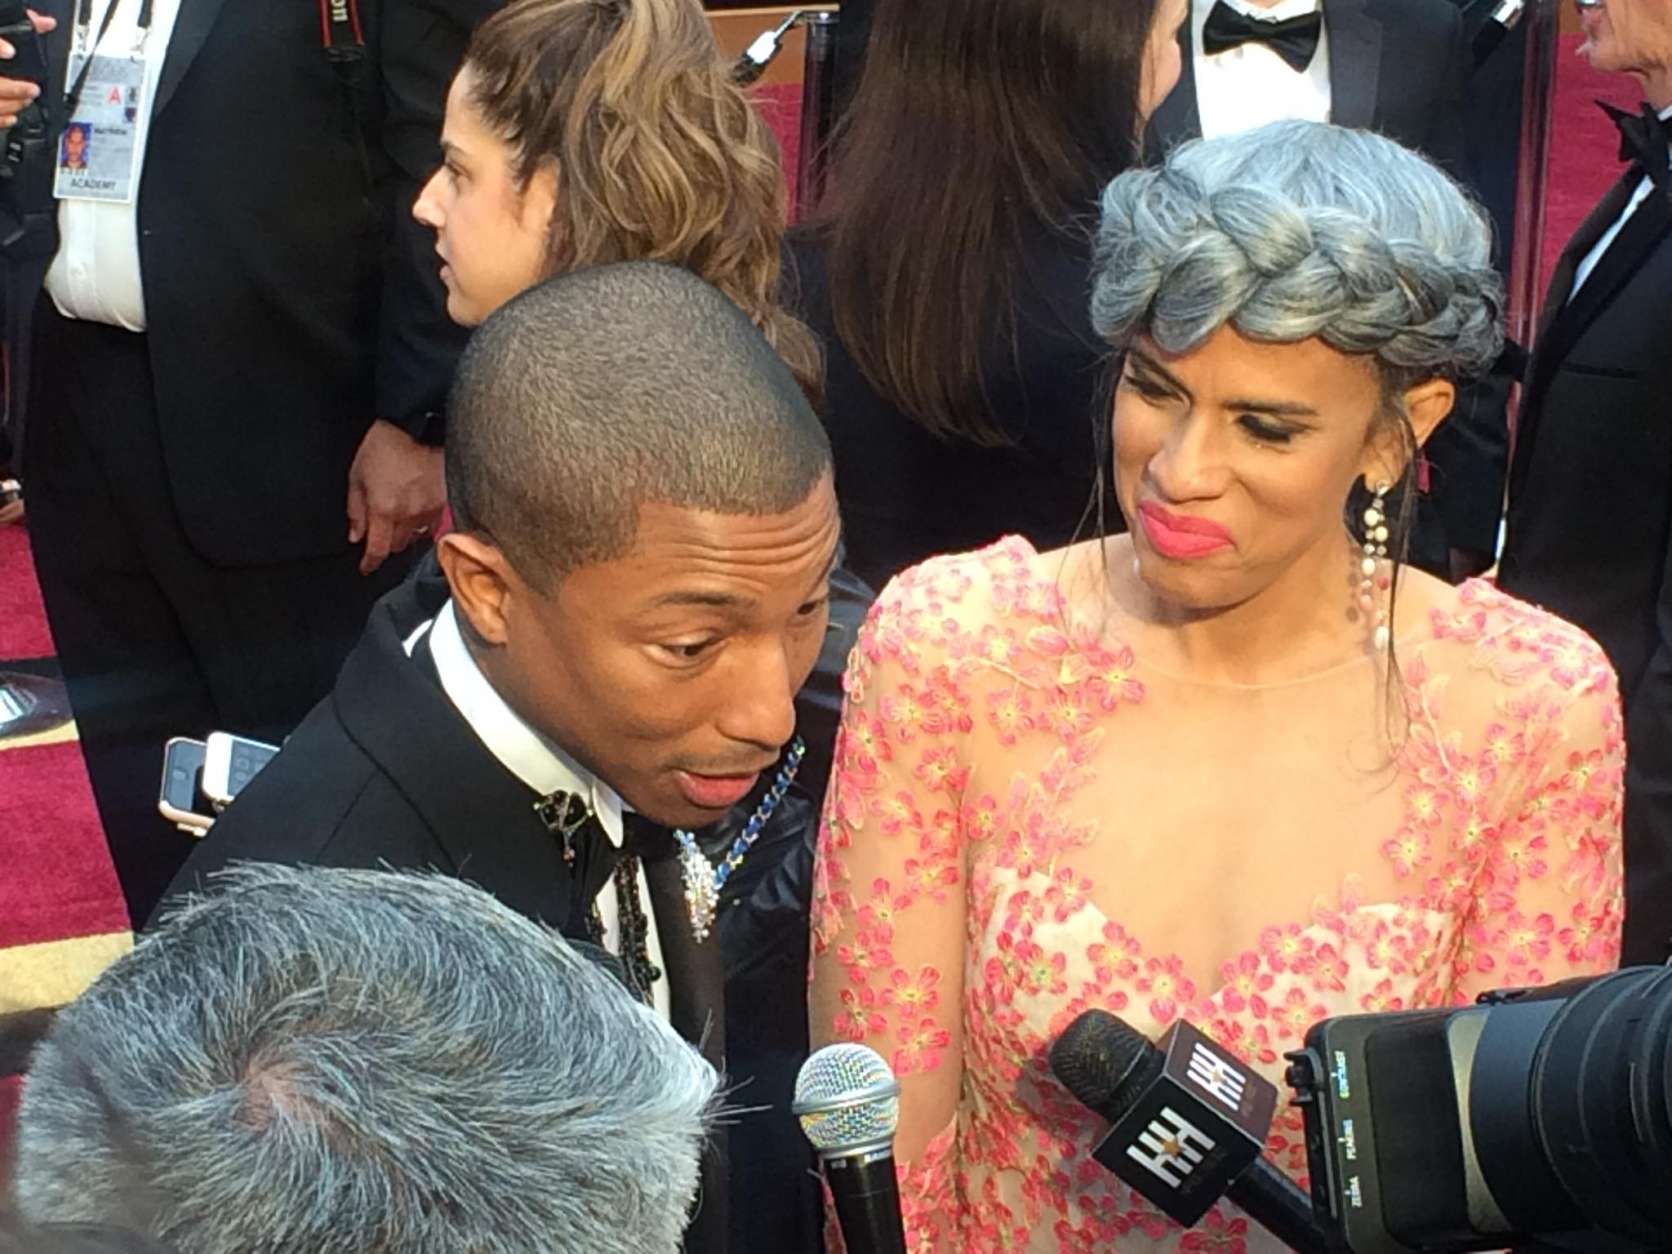 Pharrell Williams answers questions on the red carpet. (WTOP/Jason Fraley)